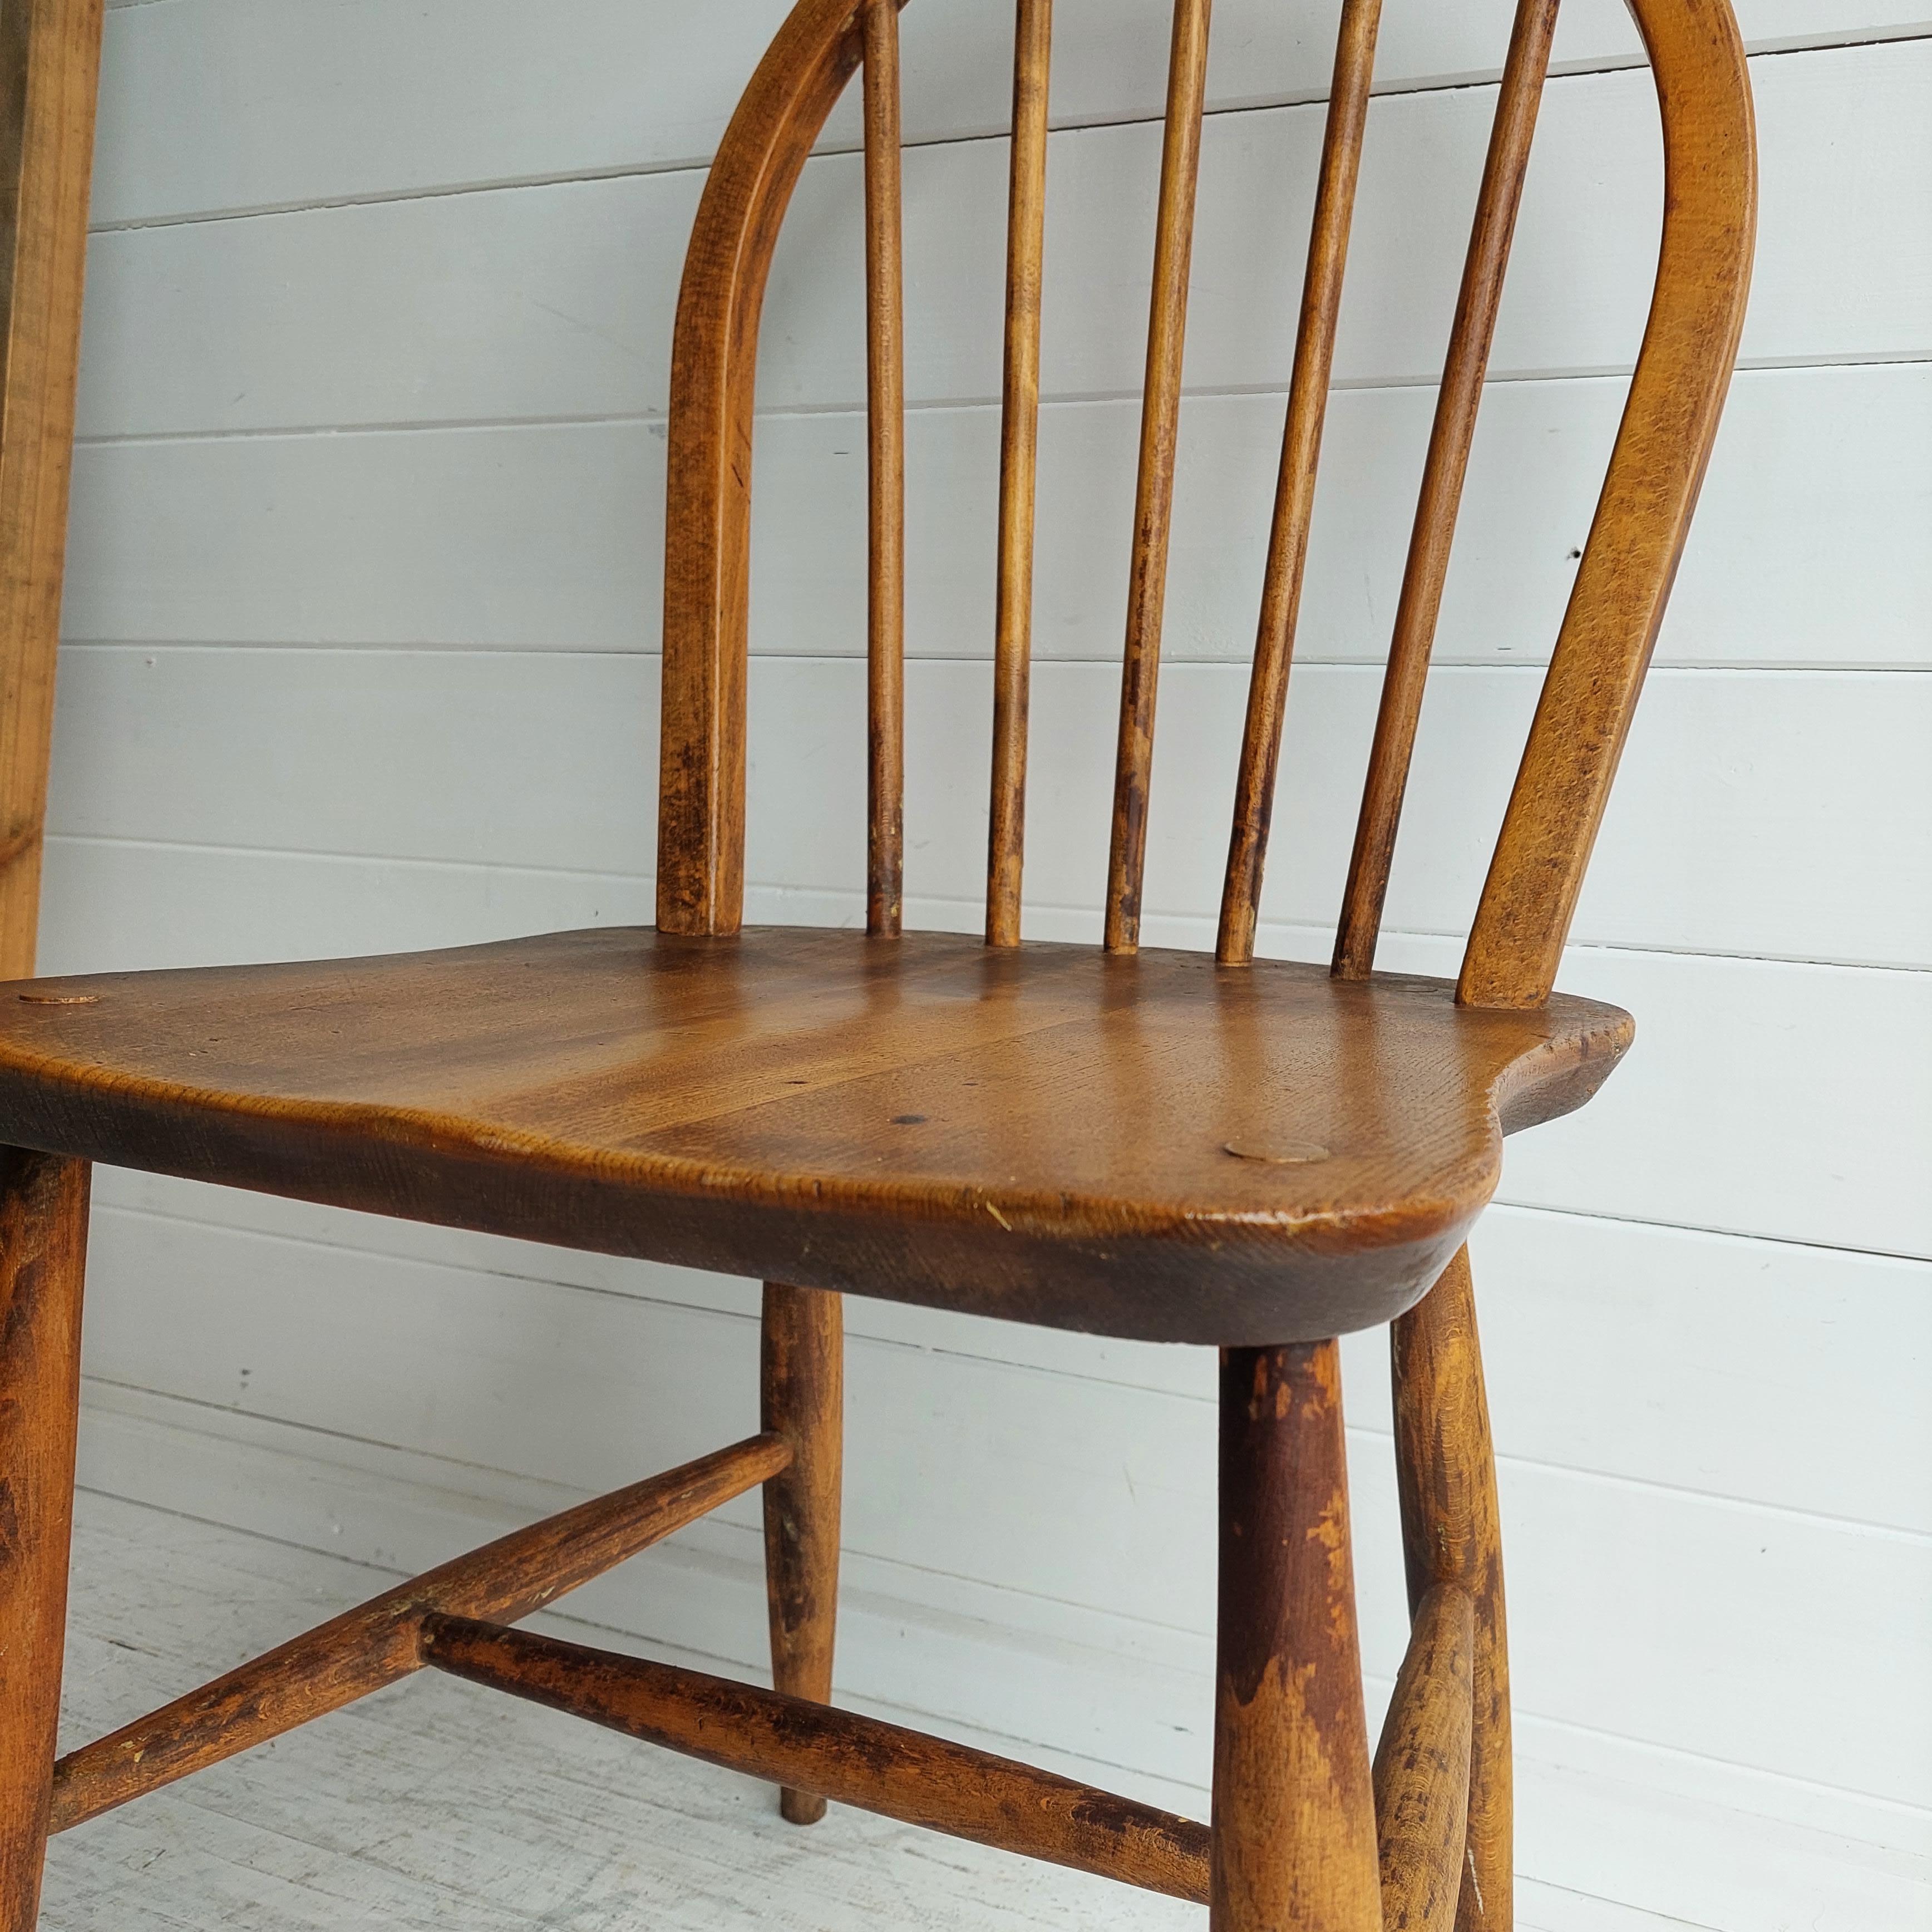 Beech Midcentury Ercol Windsor Kitchen Chair 'Model No. 4a or No. 100', 50s